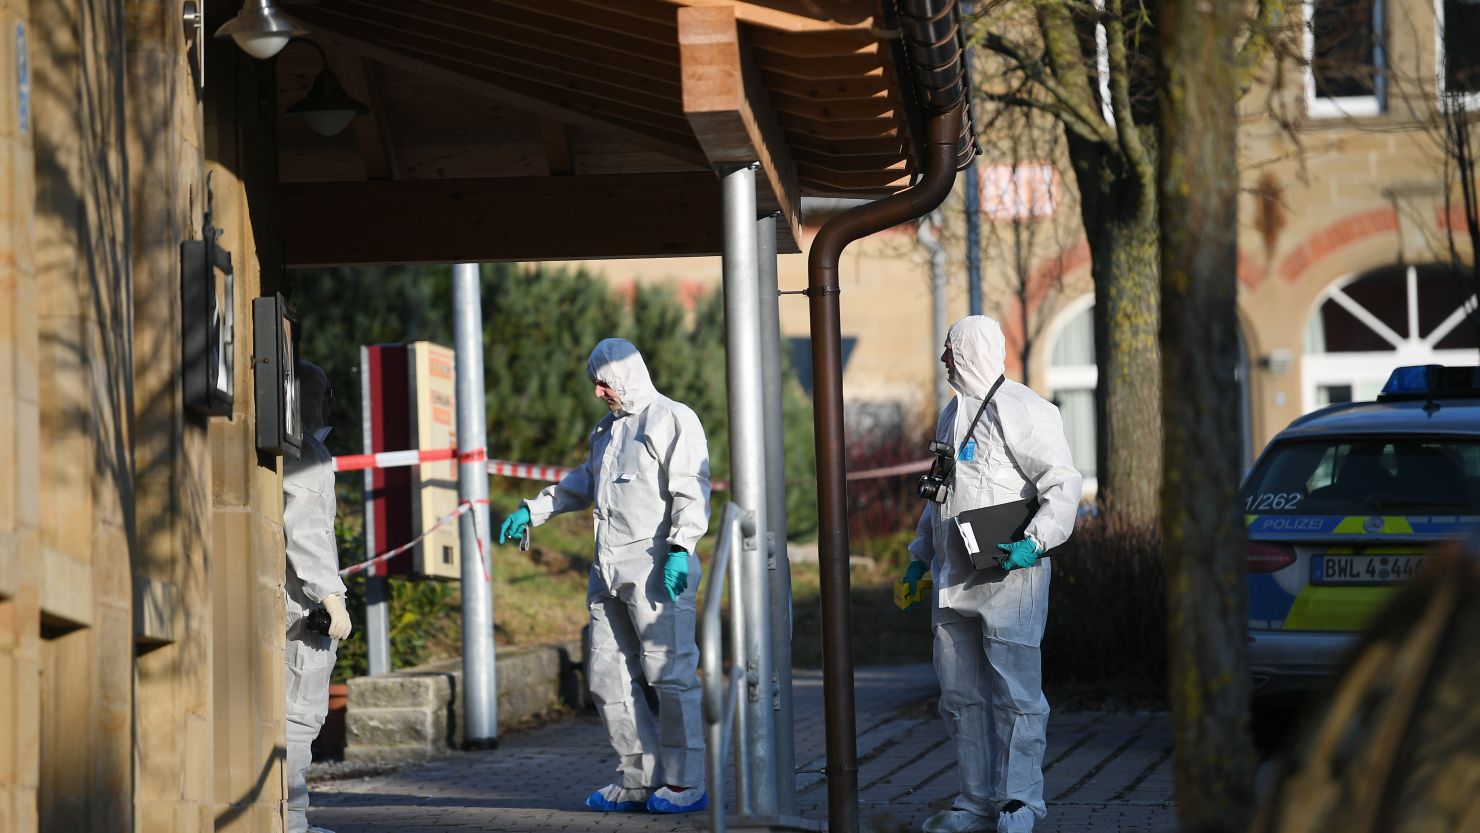 Forensic police officers investigate the shooting in Rot am See, Germany.